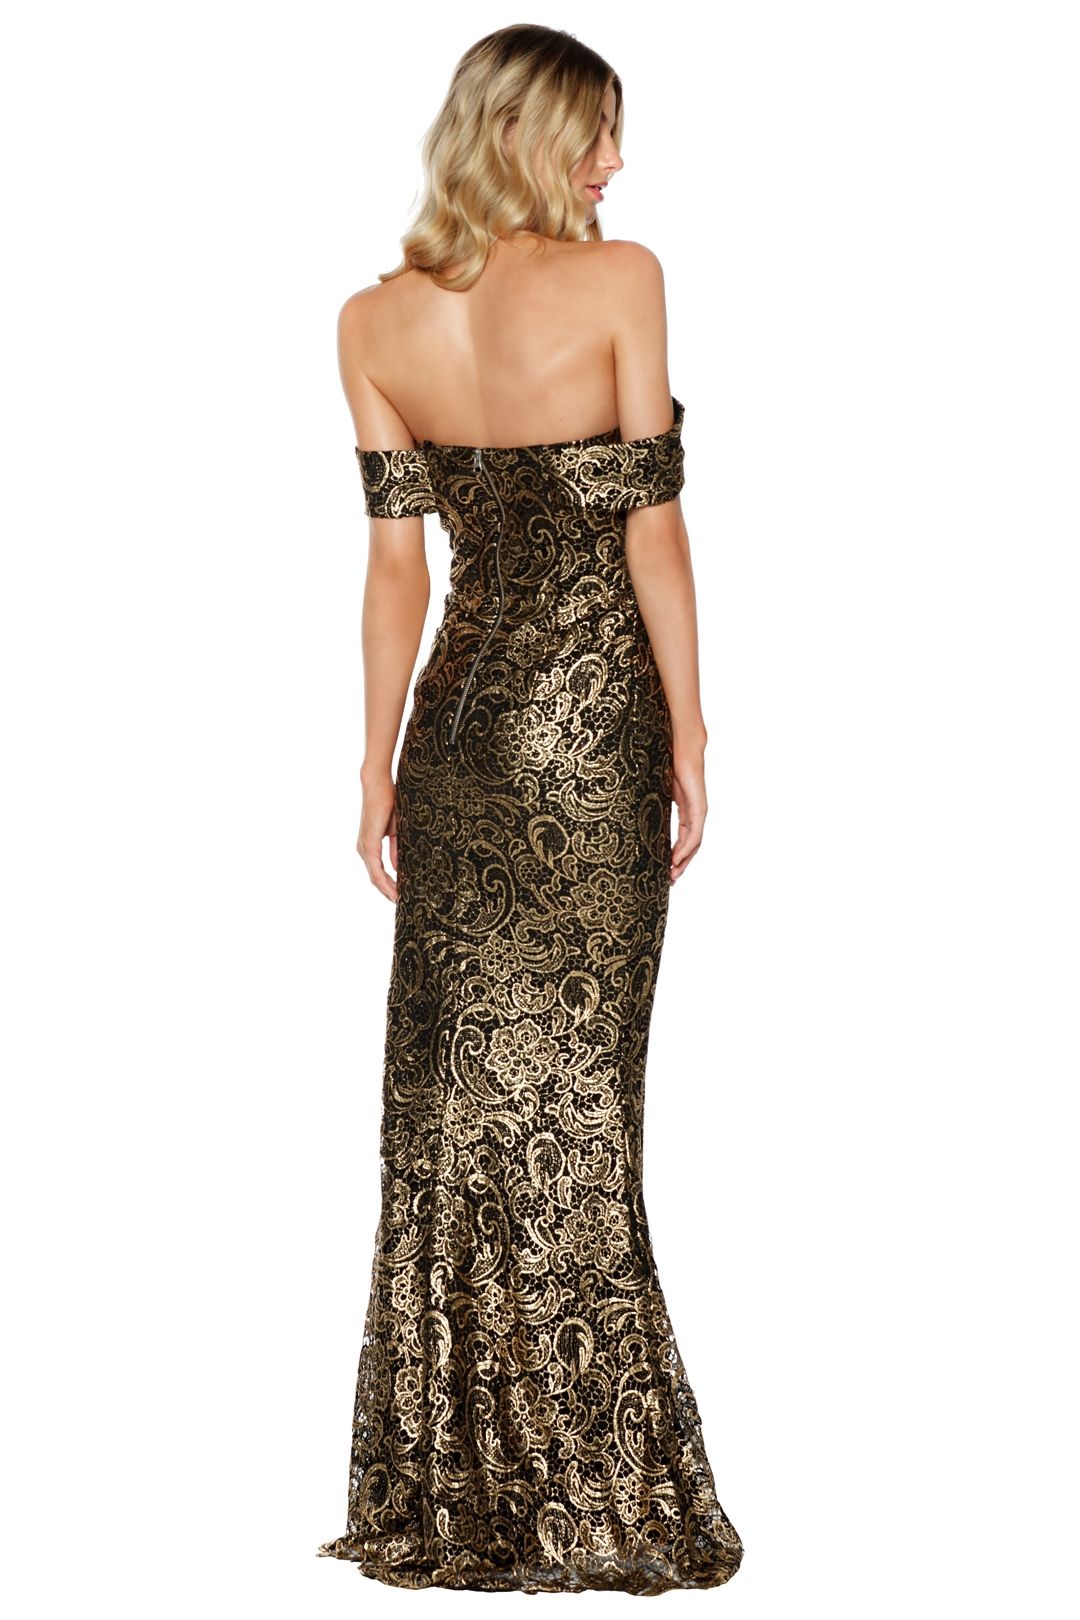 Gold Rush Off The Shoulder Gown by Grace & Hart for Rent